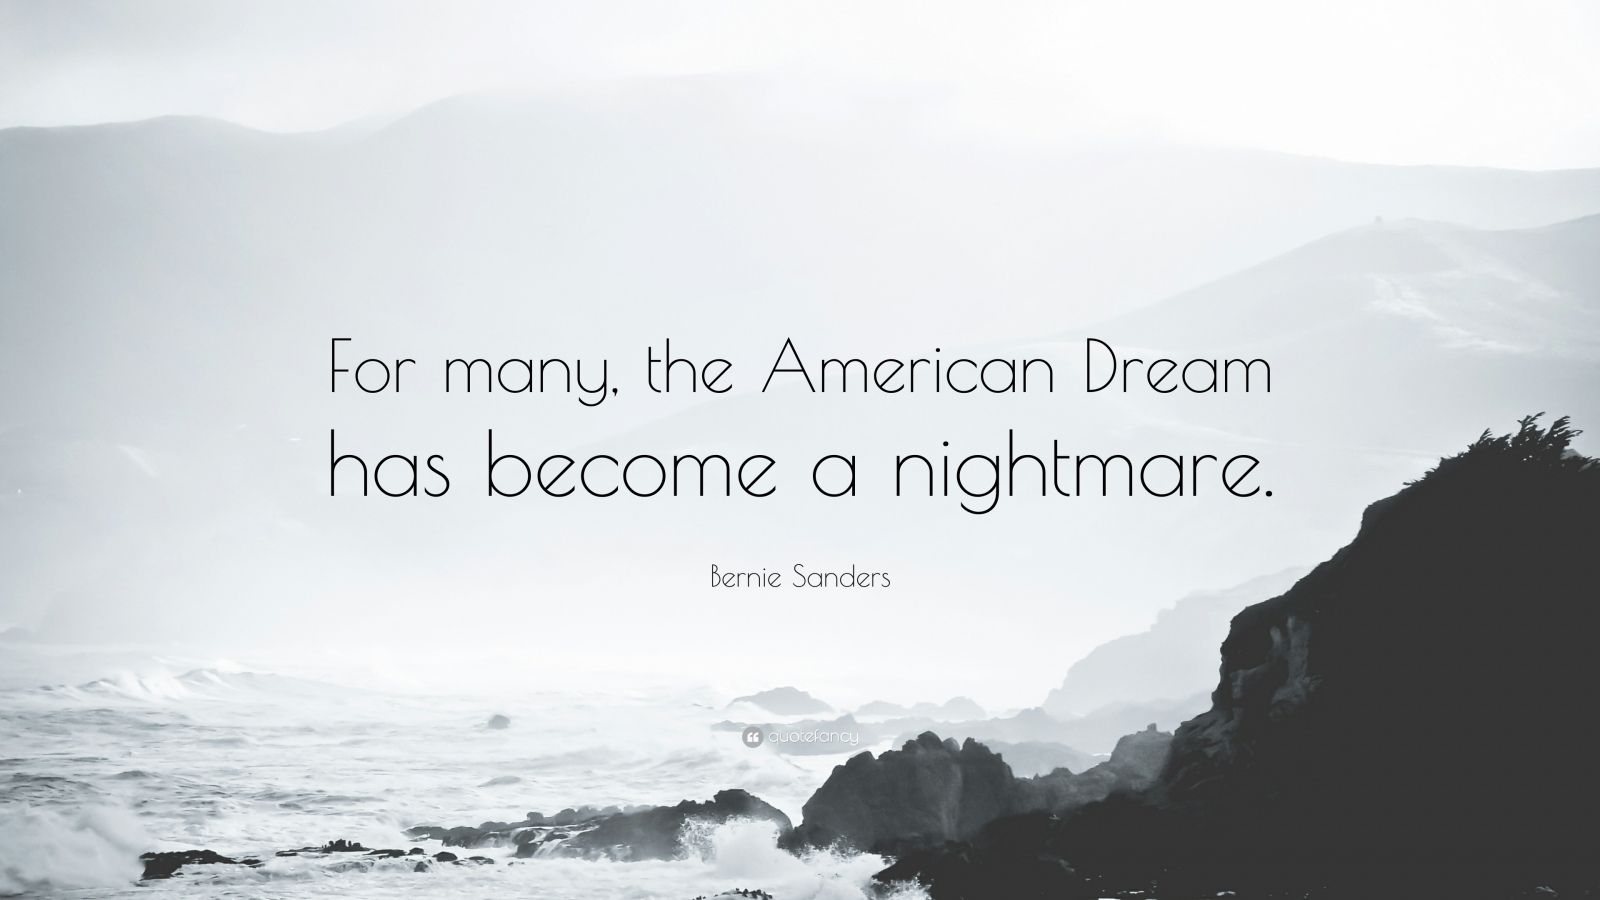 Bernie Sanders Quote: “For many, the American Dream has become a ...